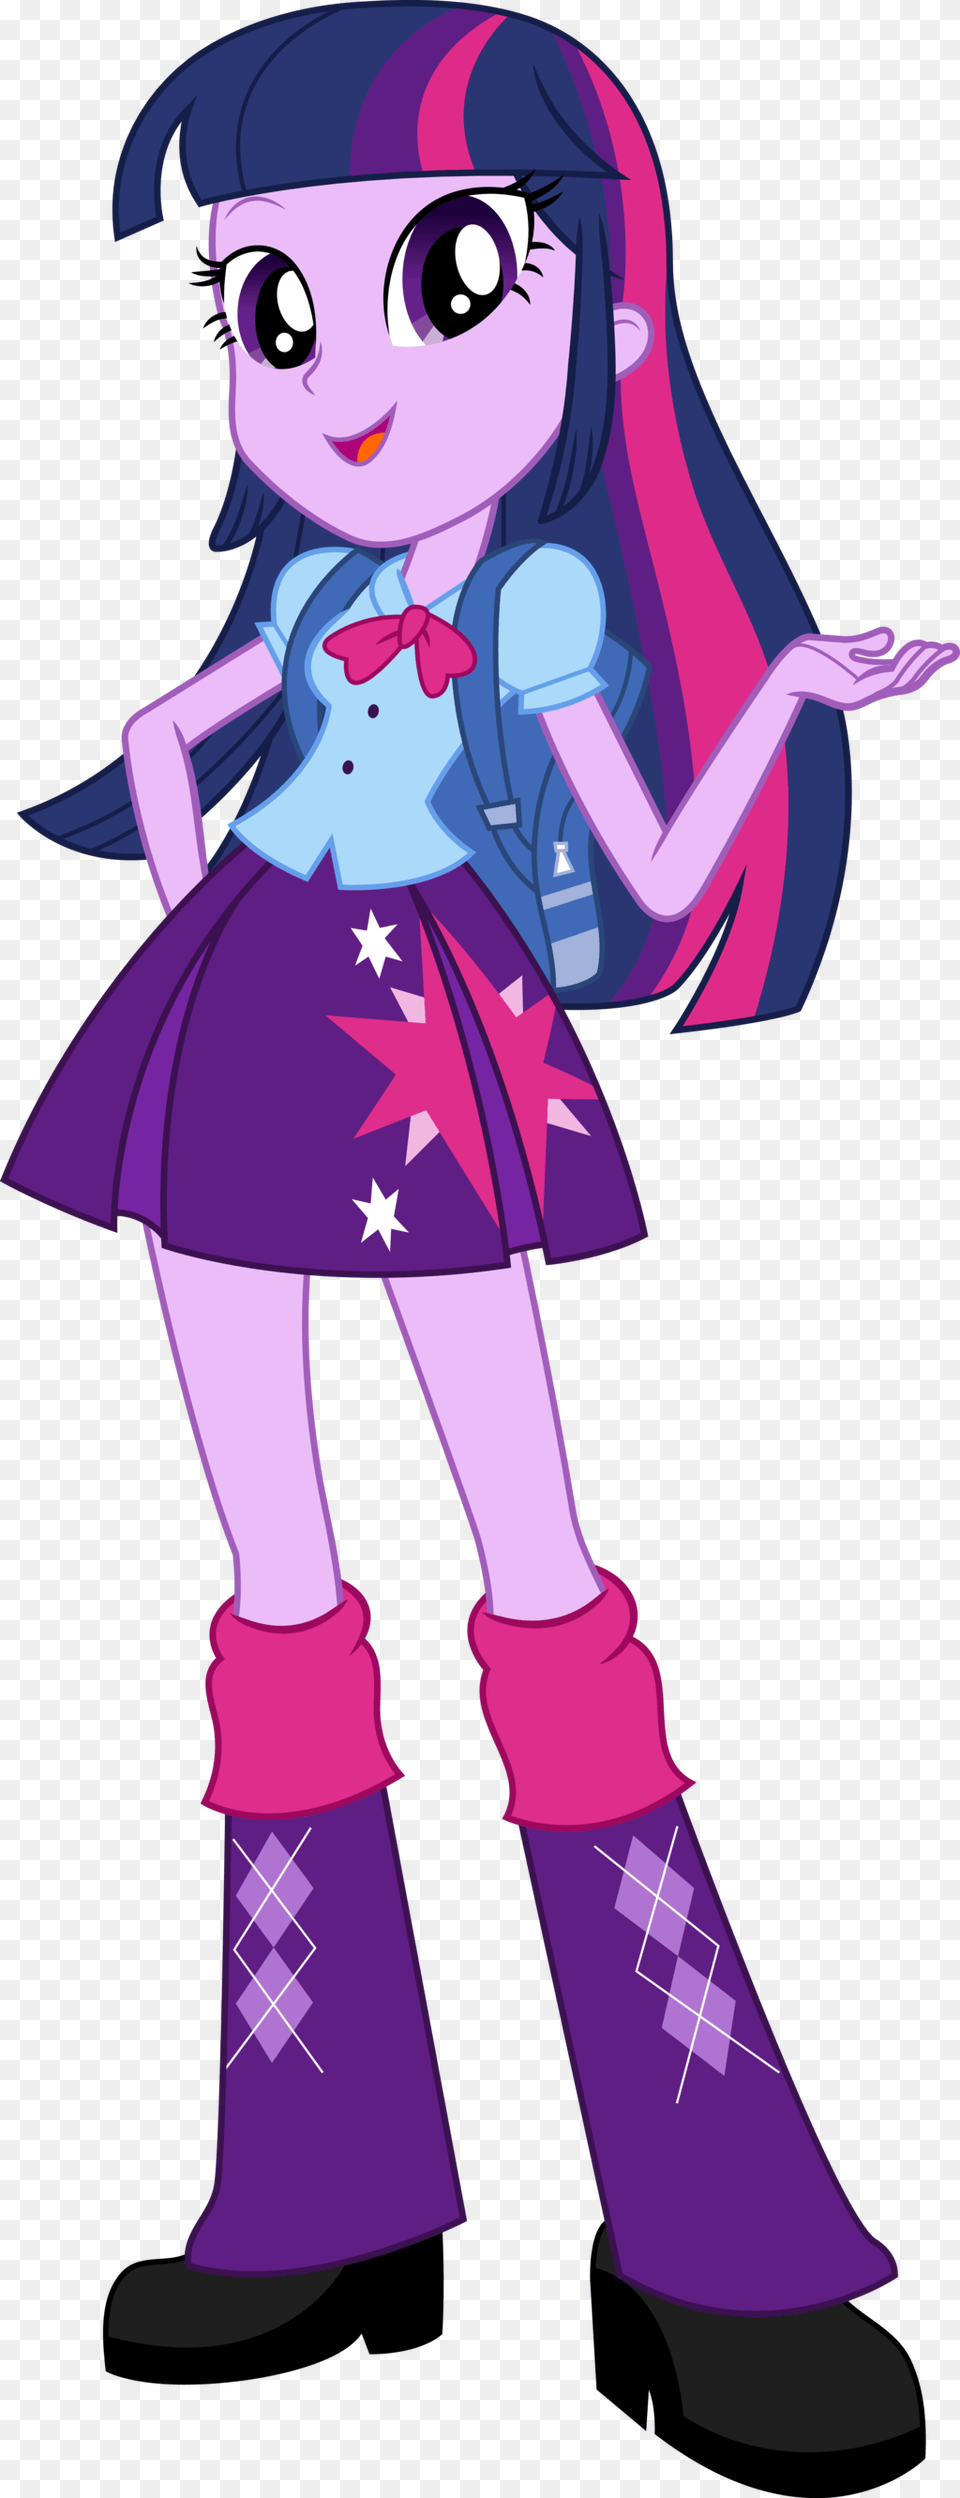 Twilight Sparkle Alicorn By Kysss By Kysss90 D5v7bhe Equestria Girls Twilight Sparkle, Book, Publication, Purple, Comics Png Image